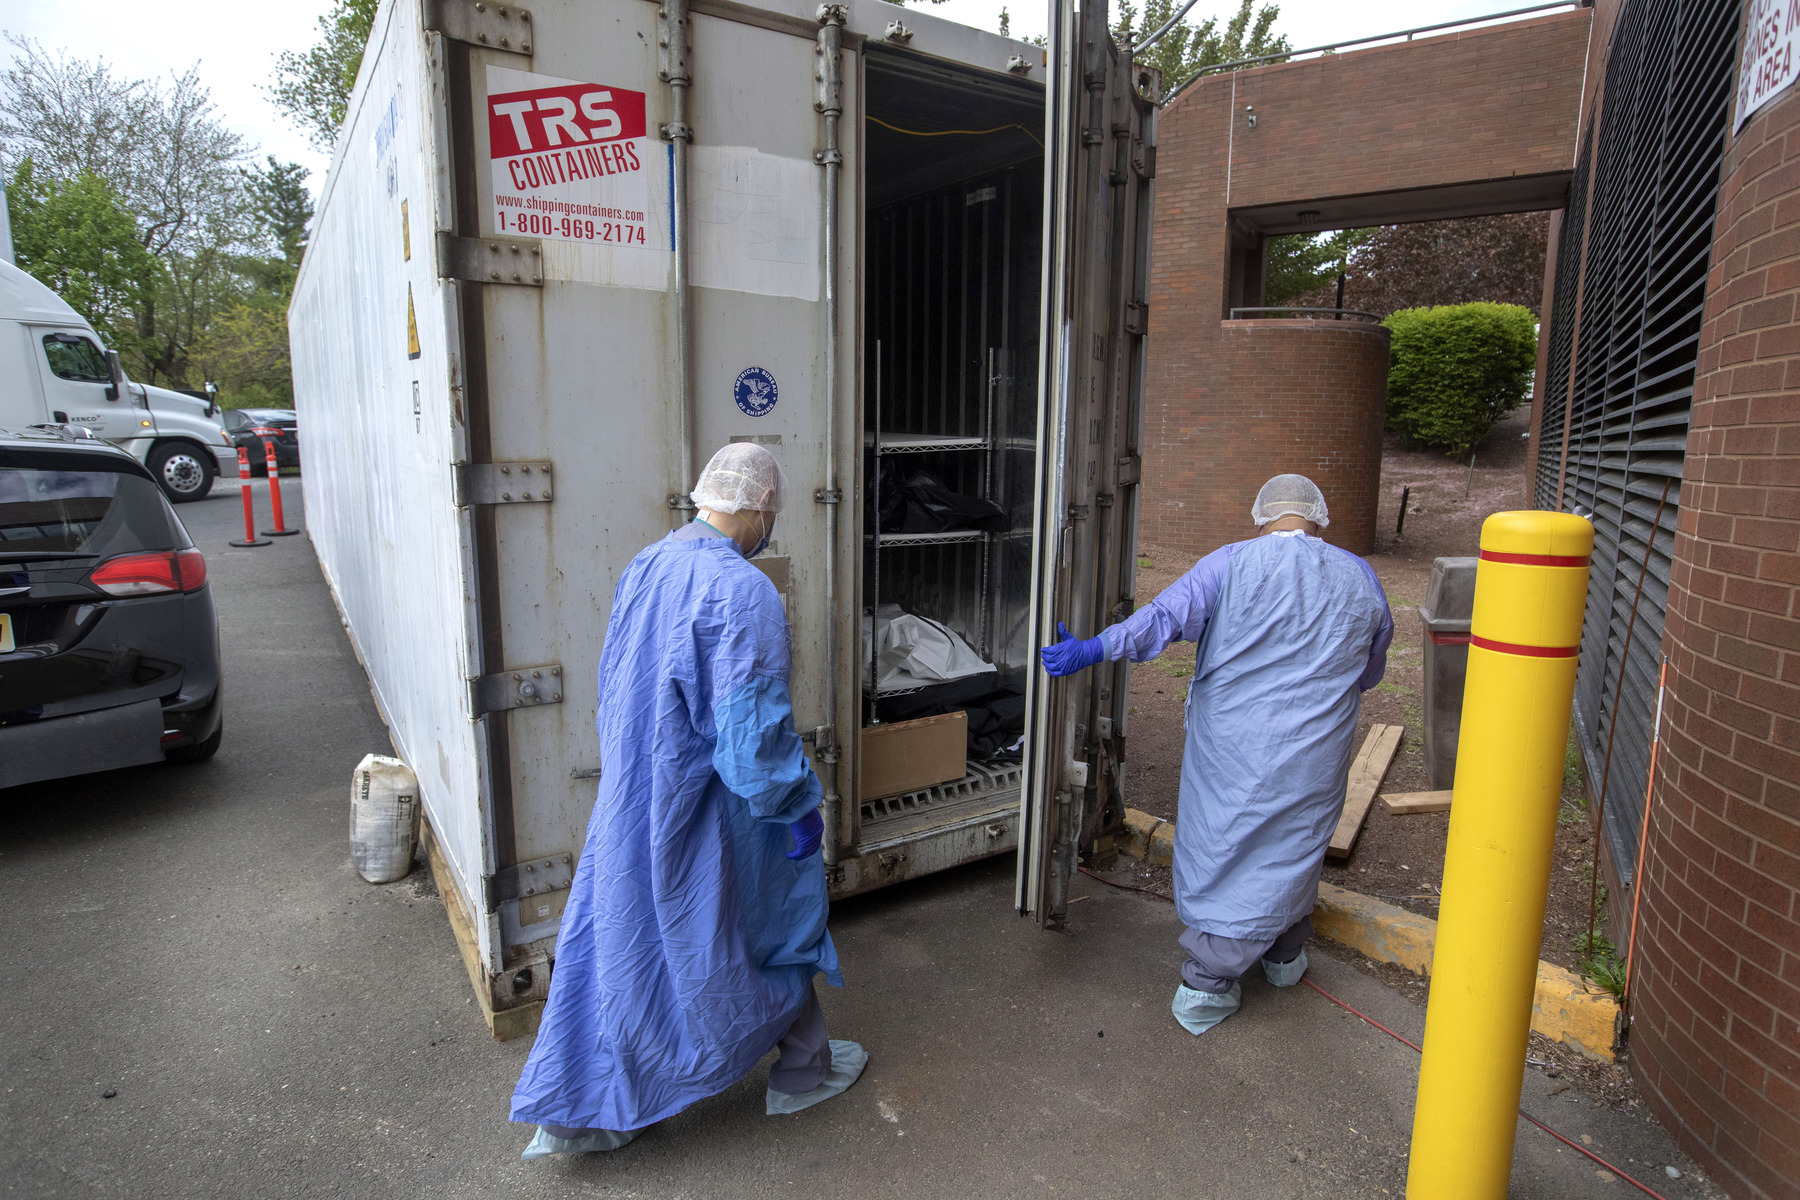 Histologists the the temporary morgue during the COVID-19 pandemic. 5/6/2020 Photo by Jeff Rhode